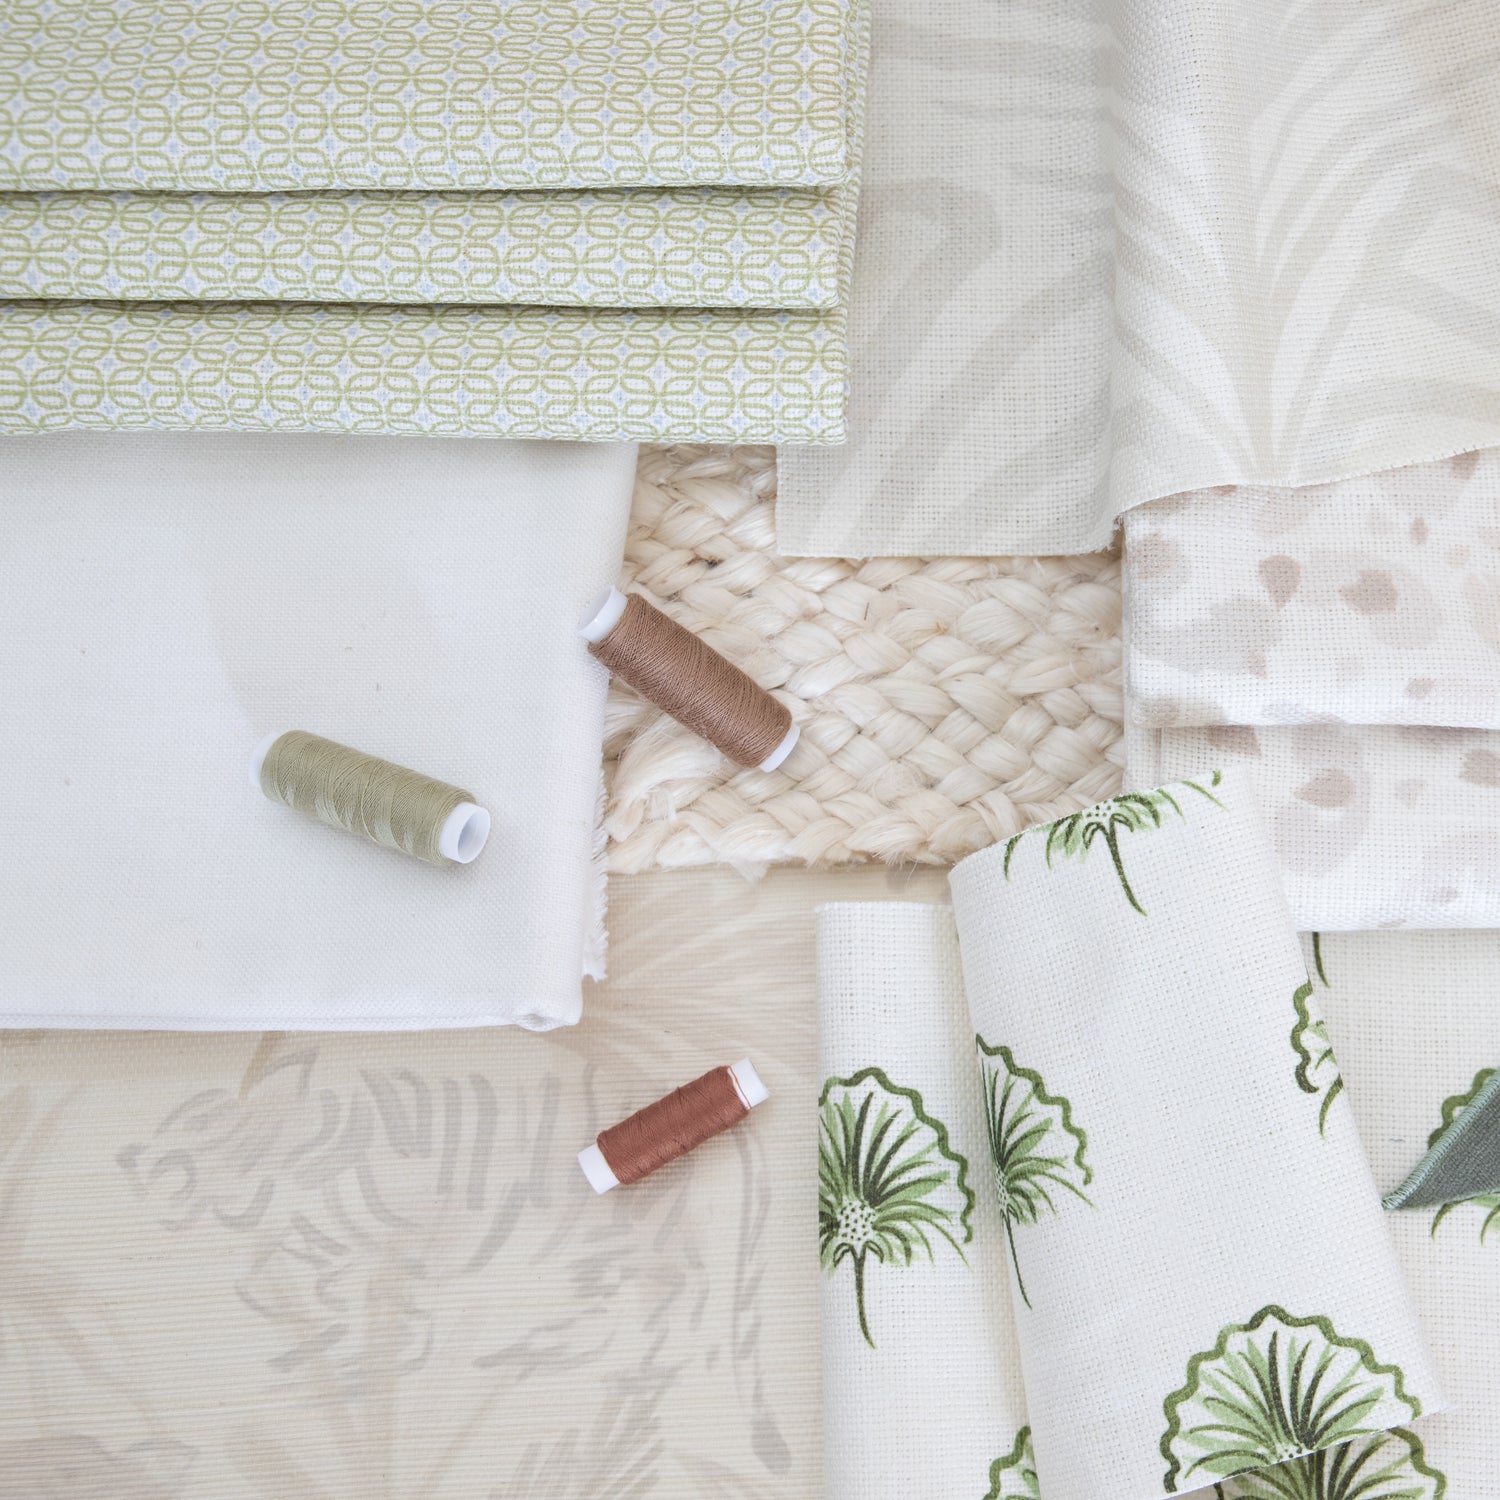 Interior design moodboard and fabric inspirations with Beige Chinoiserie Tiger Printed Linen Swatch, Beige Botanical Stripe Printed Linen Swatch, Beige Animal Printed Linen Swatch and Green Floral Printed Linen Swatch